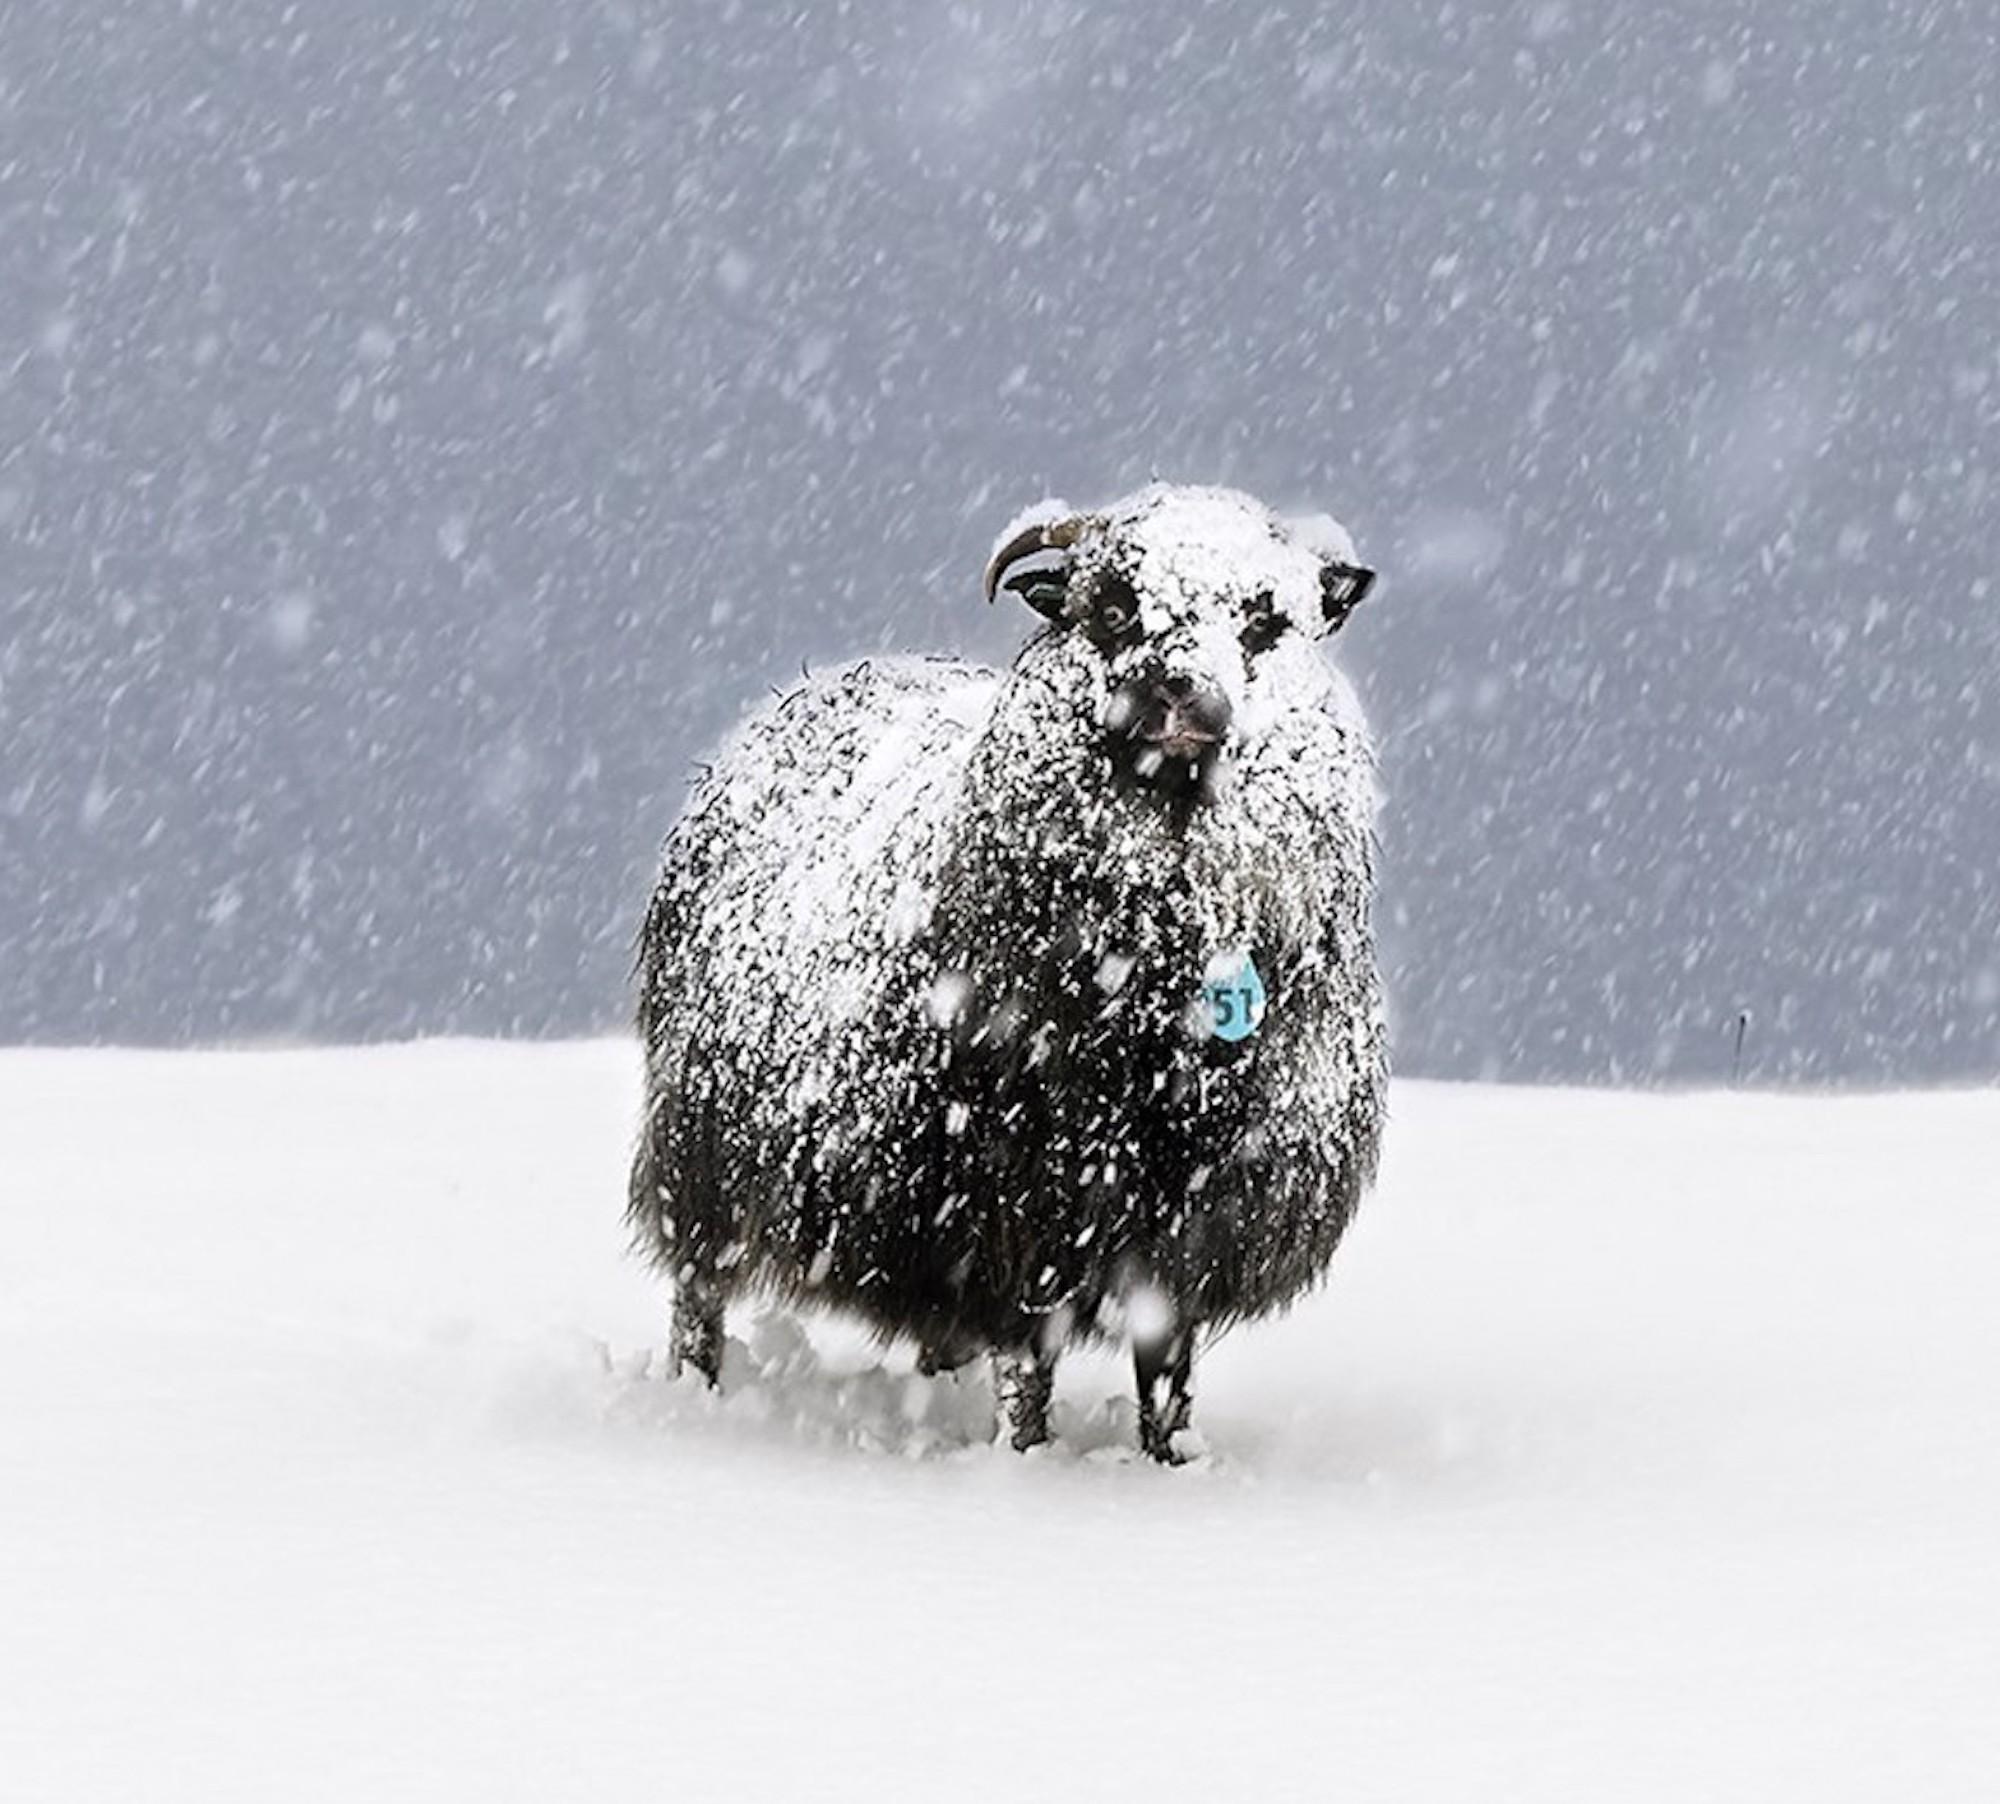 No.51 by Christophe Jacrot - Winter photography, animal, sheep, snowy landscape For Sale 2